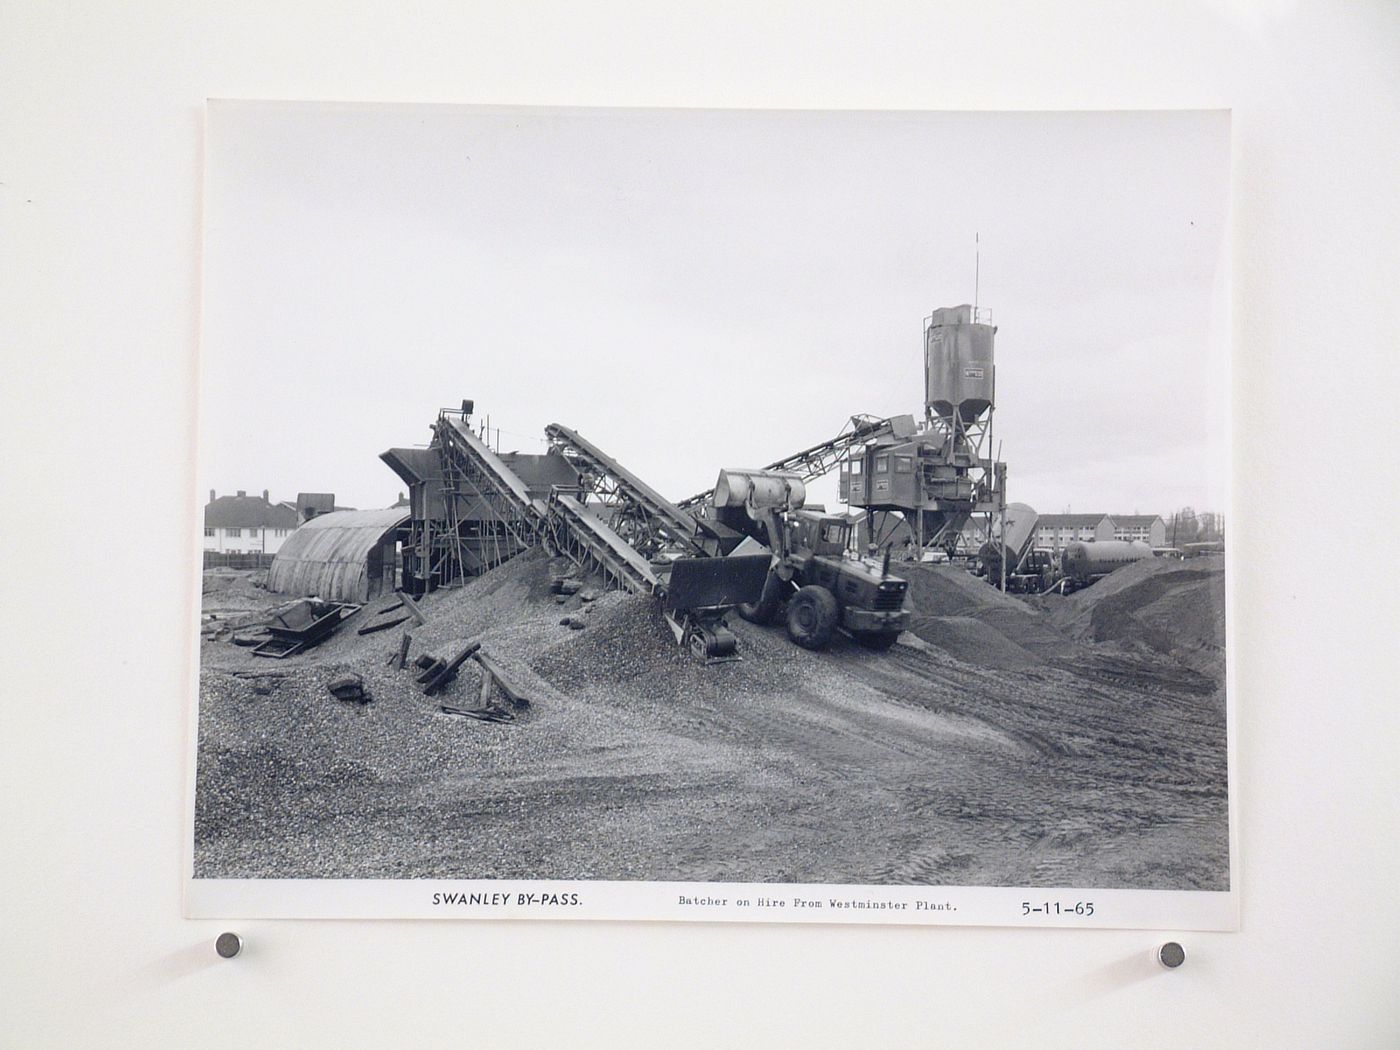 View of batcher on hire from Westminster Plant, during construction of the Swanley Bypass, England